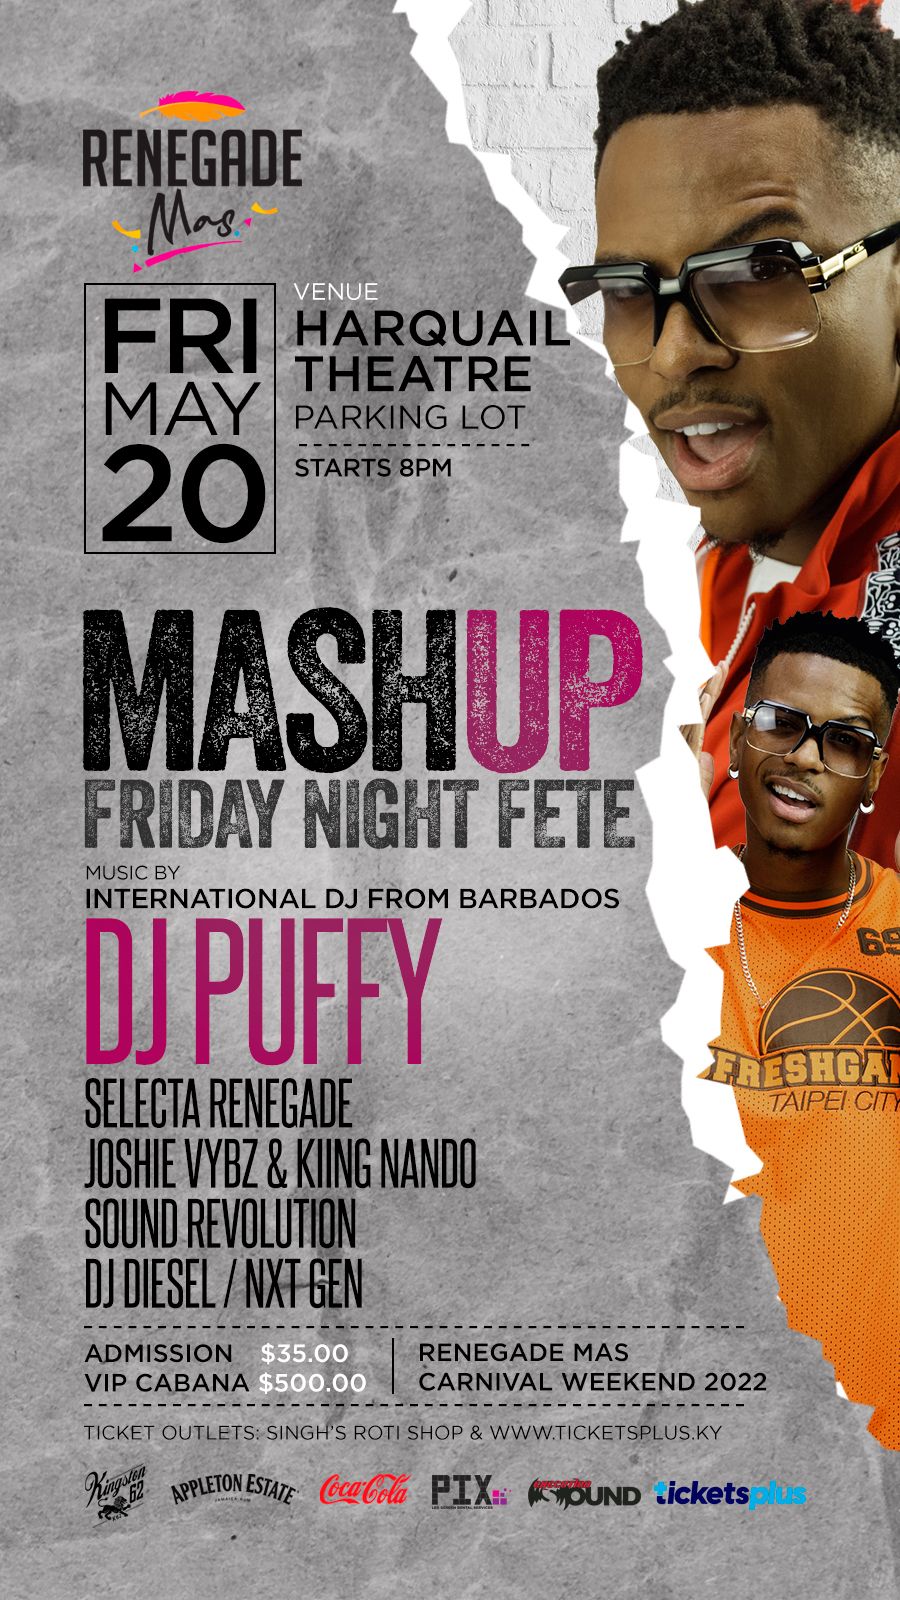 Out of this World - MASH UP Friday Night Fete